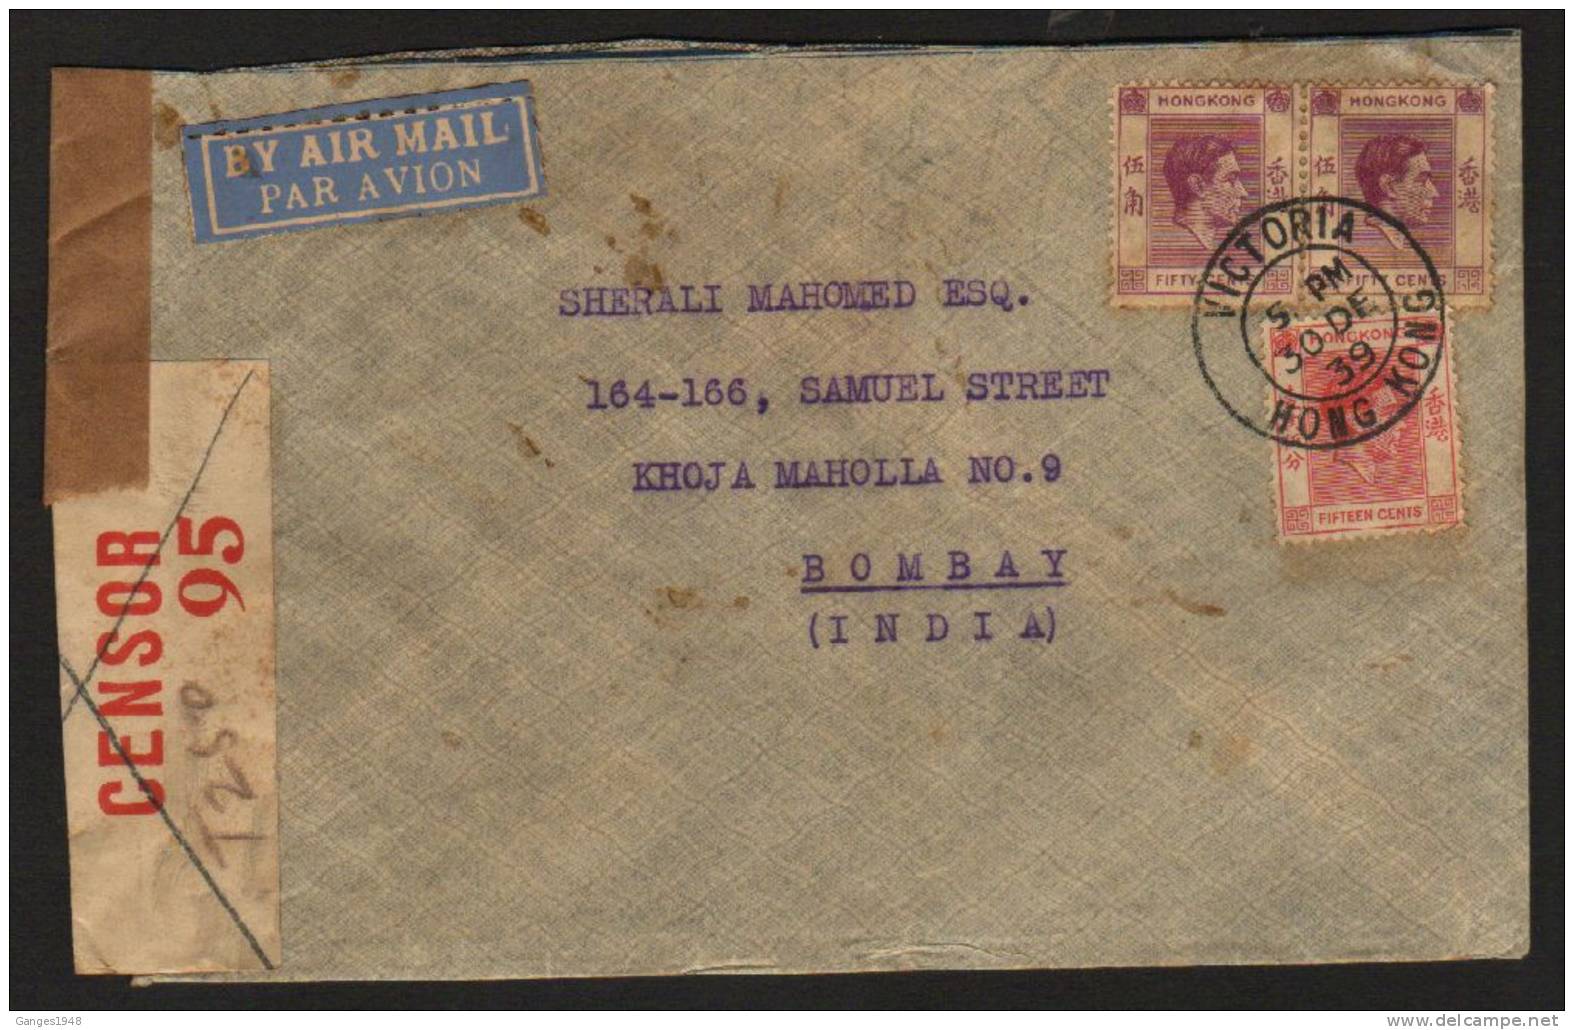 30 DE 39 HONG KONG KG VI  $1.15 Rate AIR MAIL  Cover To India ARRIVAL CENSOR # 25238 - Lettres & Documents